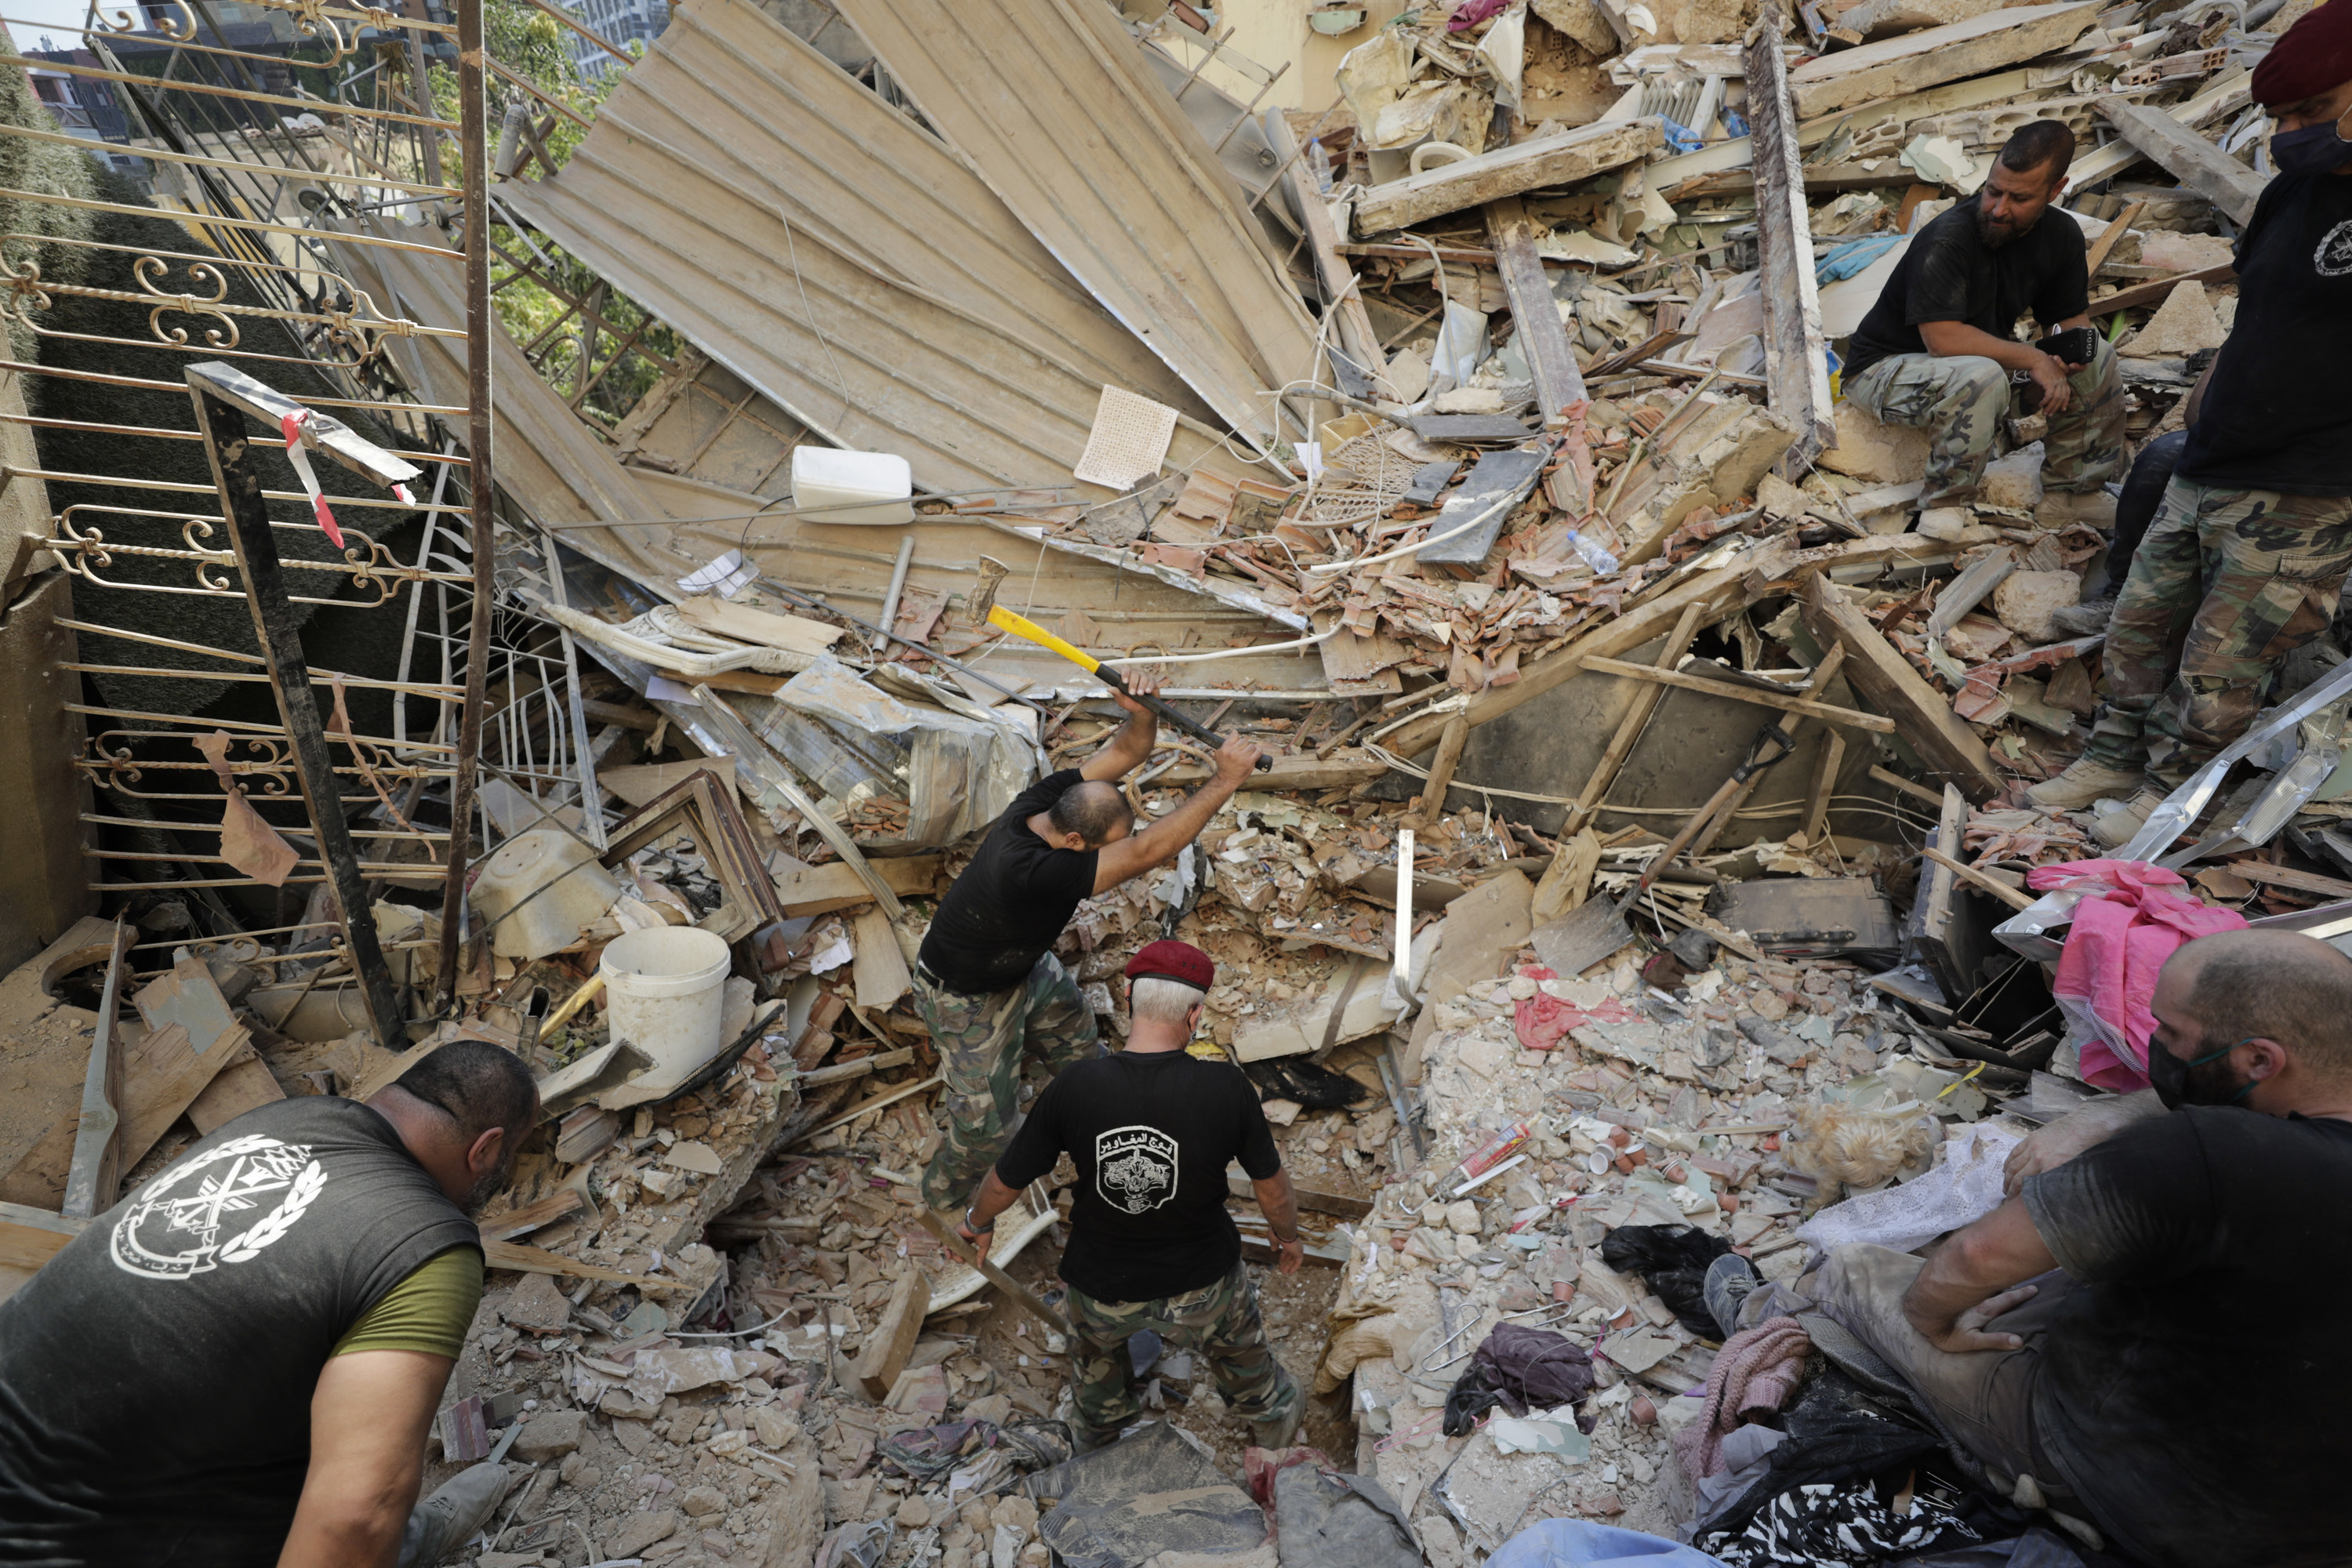 Three men in fatigues and T-shirts dig through a massive pile of rubble